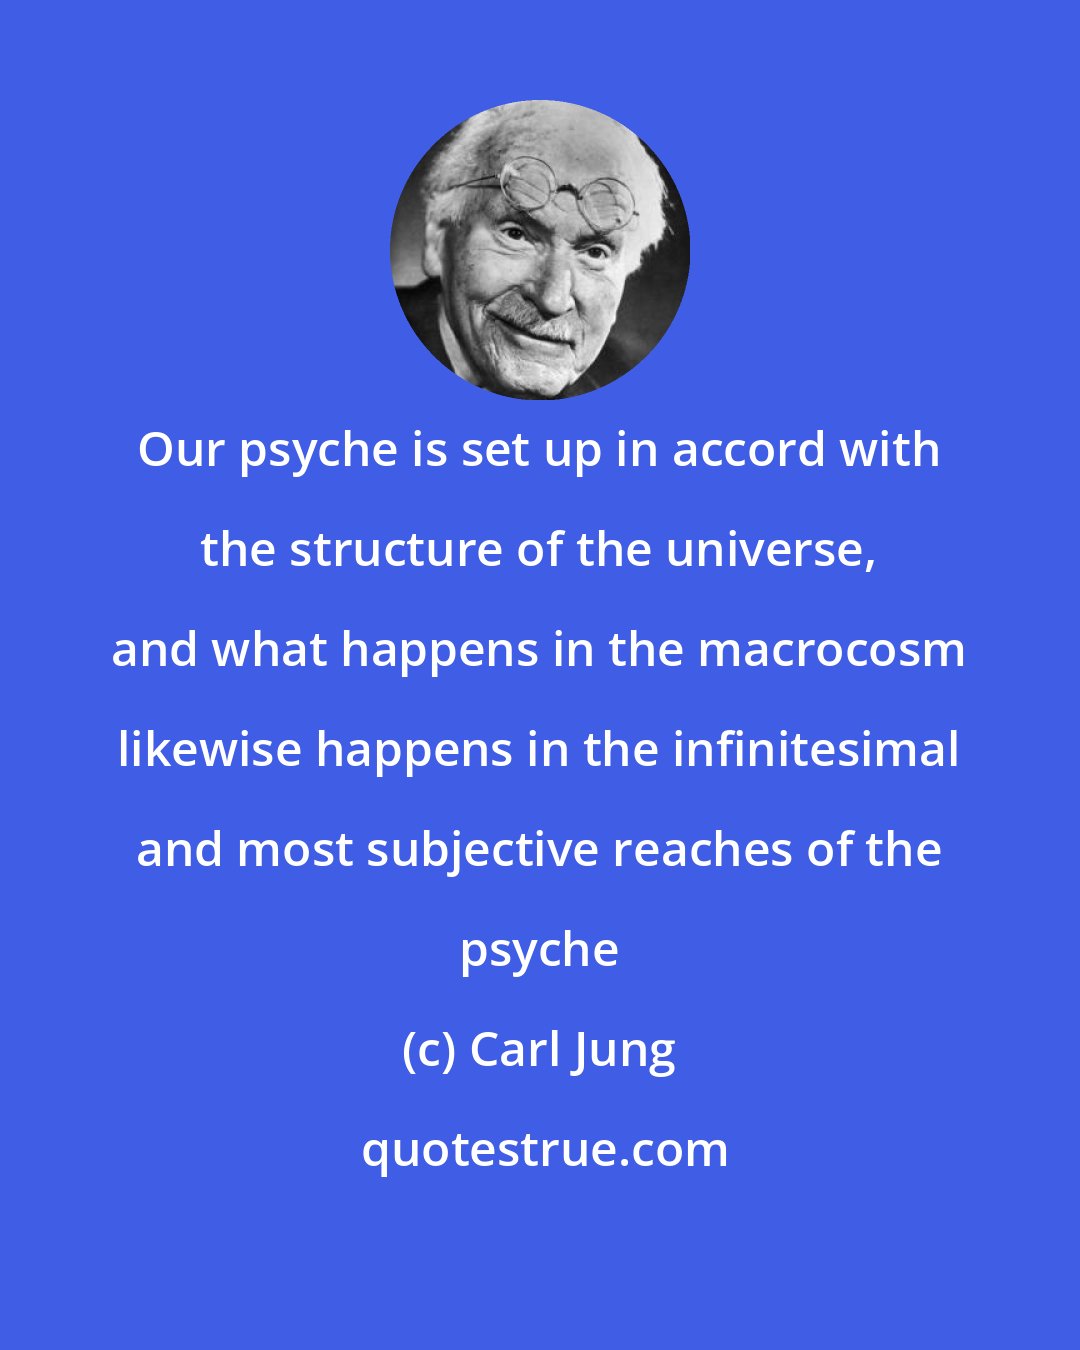 Carl Jung: Our psyche is set up in accord with the structure of the universe, and what happens in the macrocosm likewise happens in the infinitesimal and most subjective reaches of the psyche